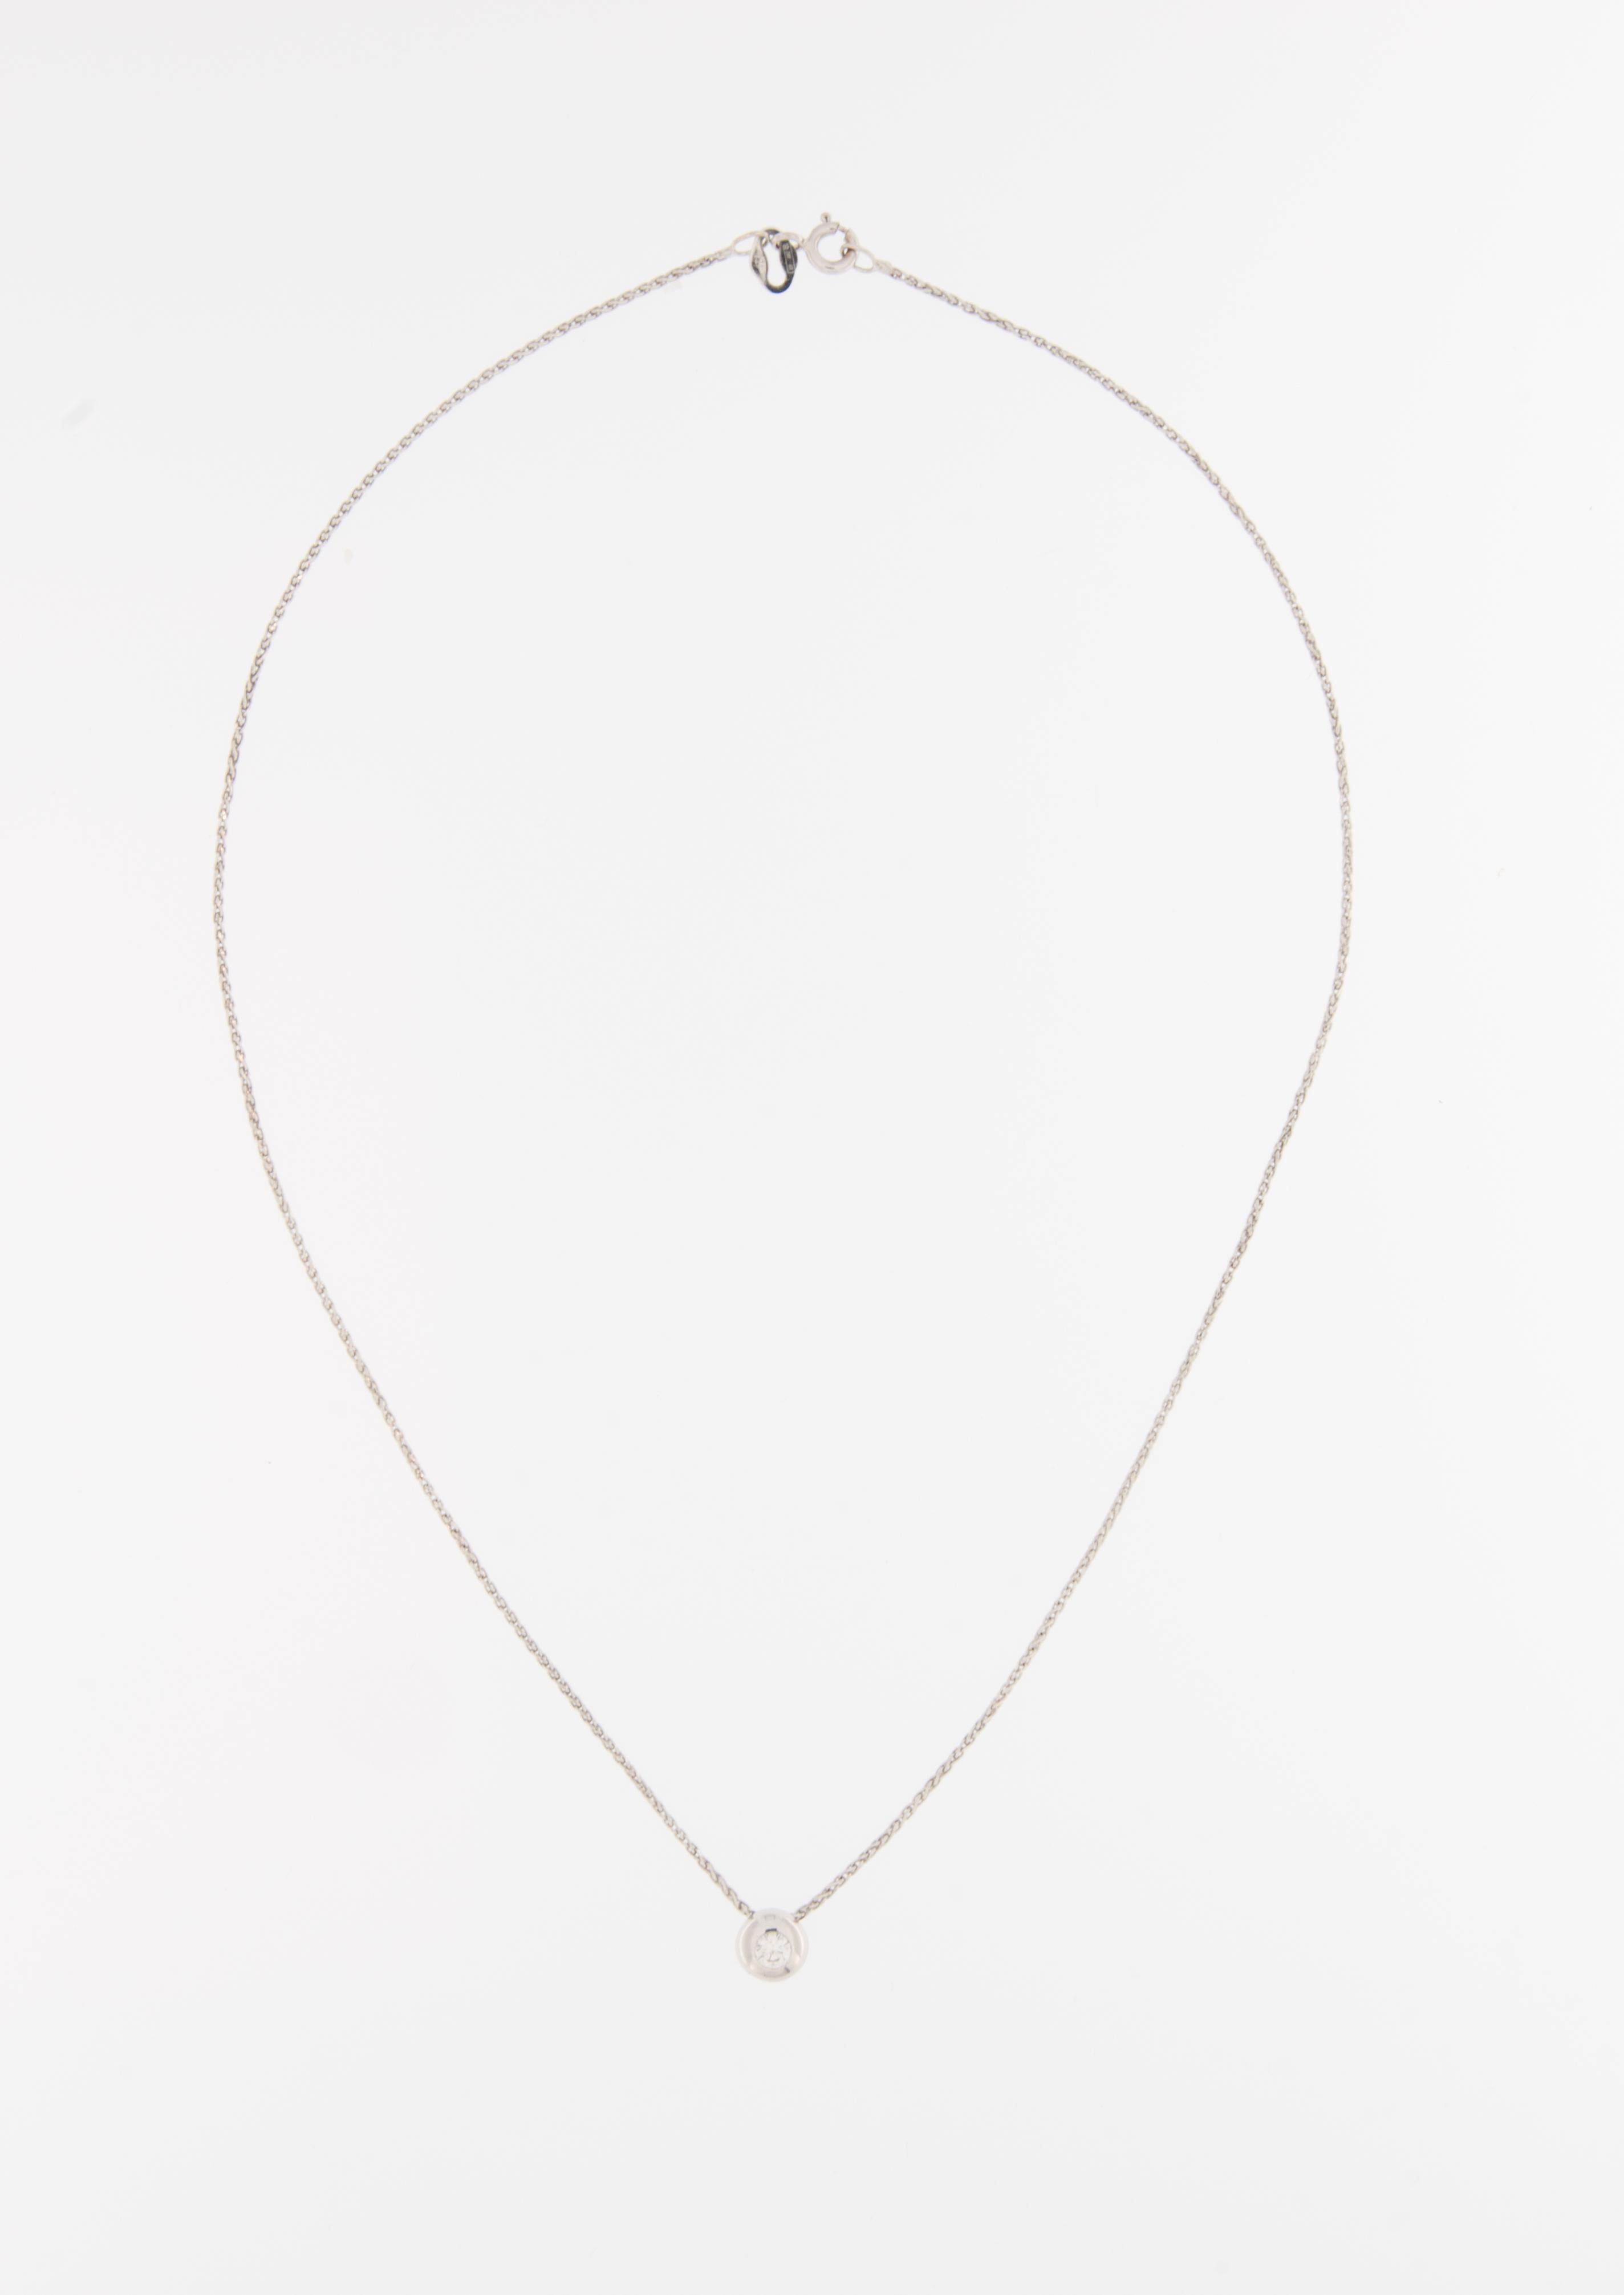 The Diamond Solitaire Necklace with Chain is a captivating and minimalist piece of jewelry, radiating elegance and sophistication. This necklace features a single, dazzling diamond set in a classic solitaire design, suspended from an 18-karat white